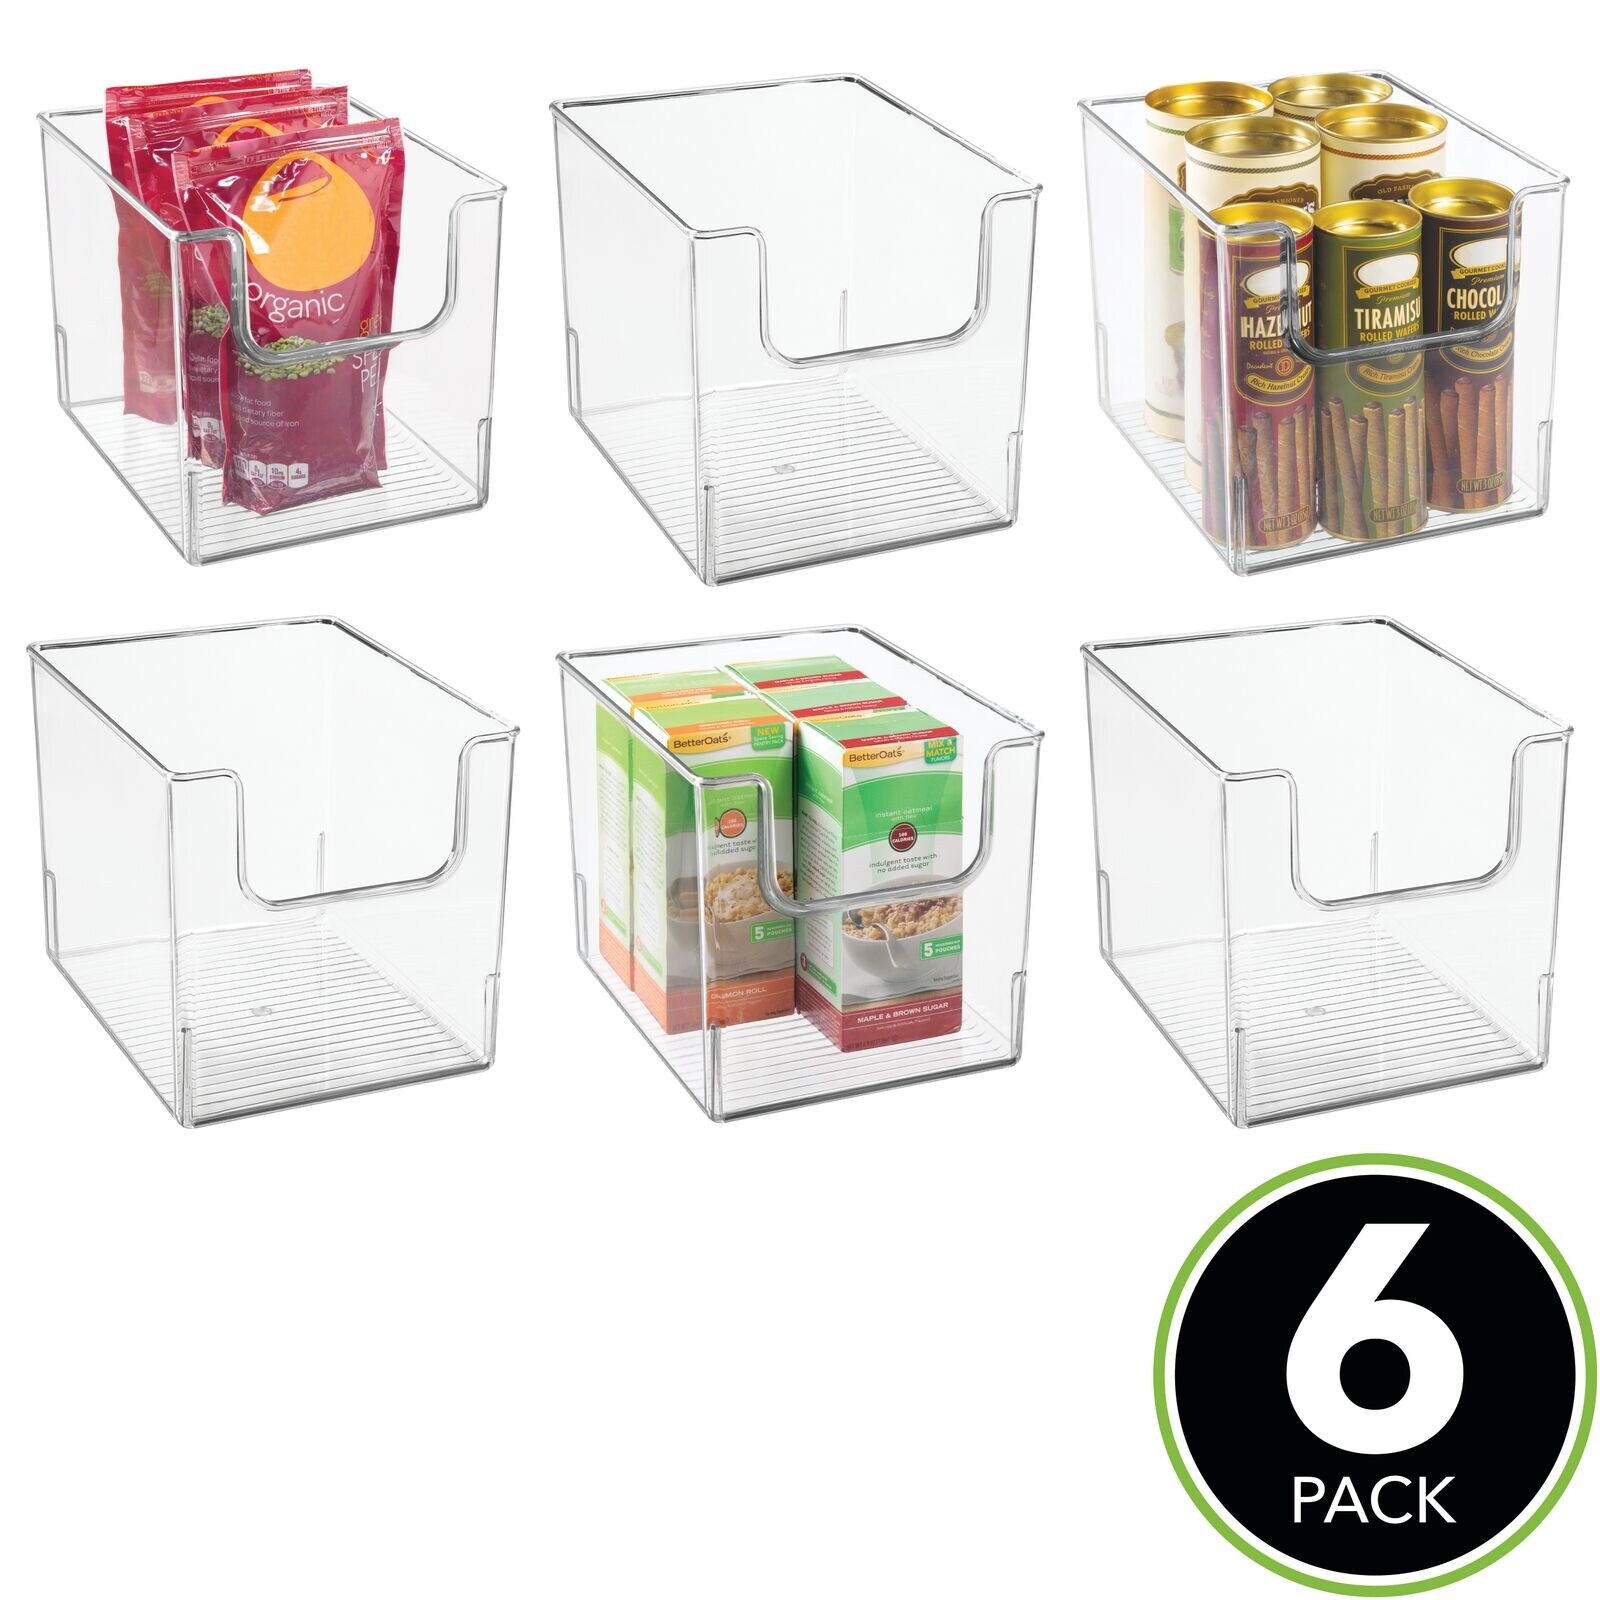 https://ak1.ostkcdn.com/images/products/is/images/direct/f94acb74cf89ba47652dc20ac02ecc0cc139da86/mDesign-Kitchen-Plastic-Storage-Organizer-Bin-with-Open-Front---6-Pack---Clear.jpg